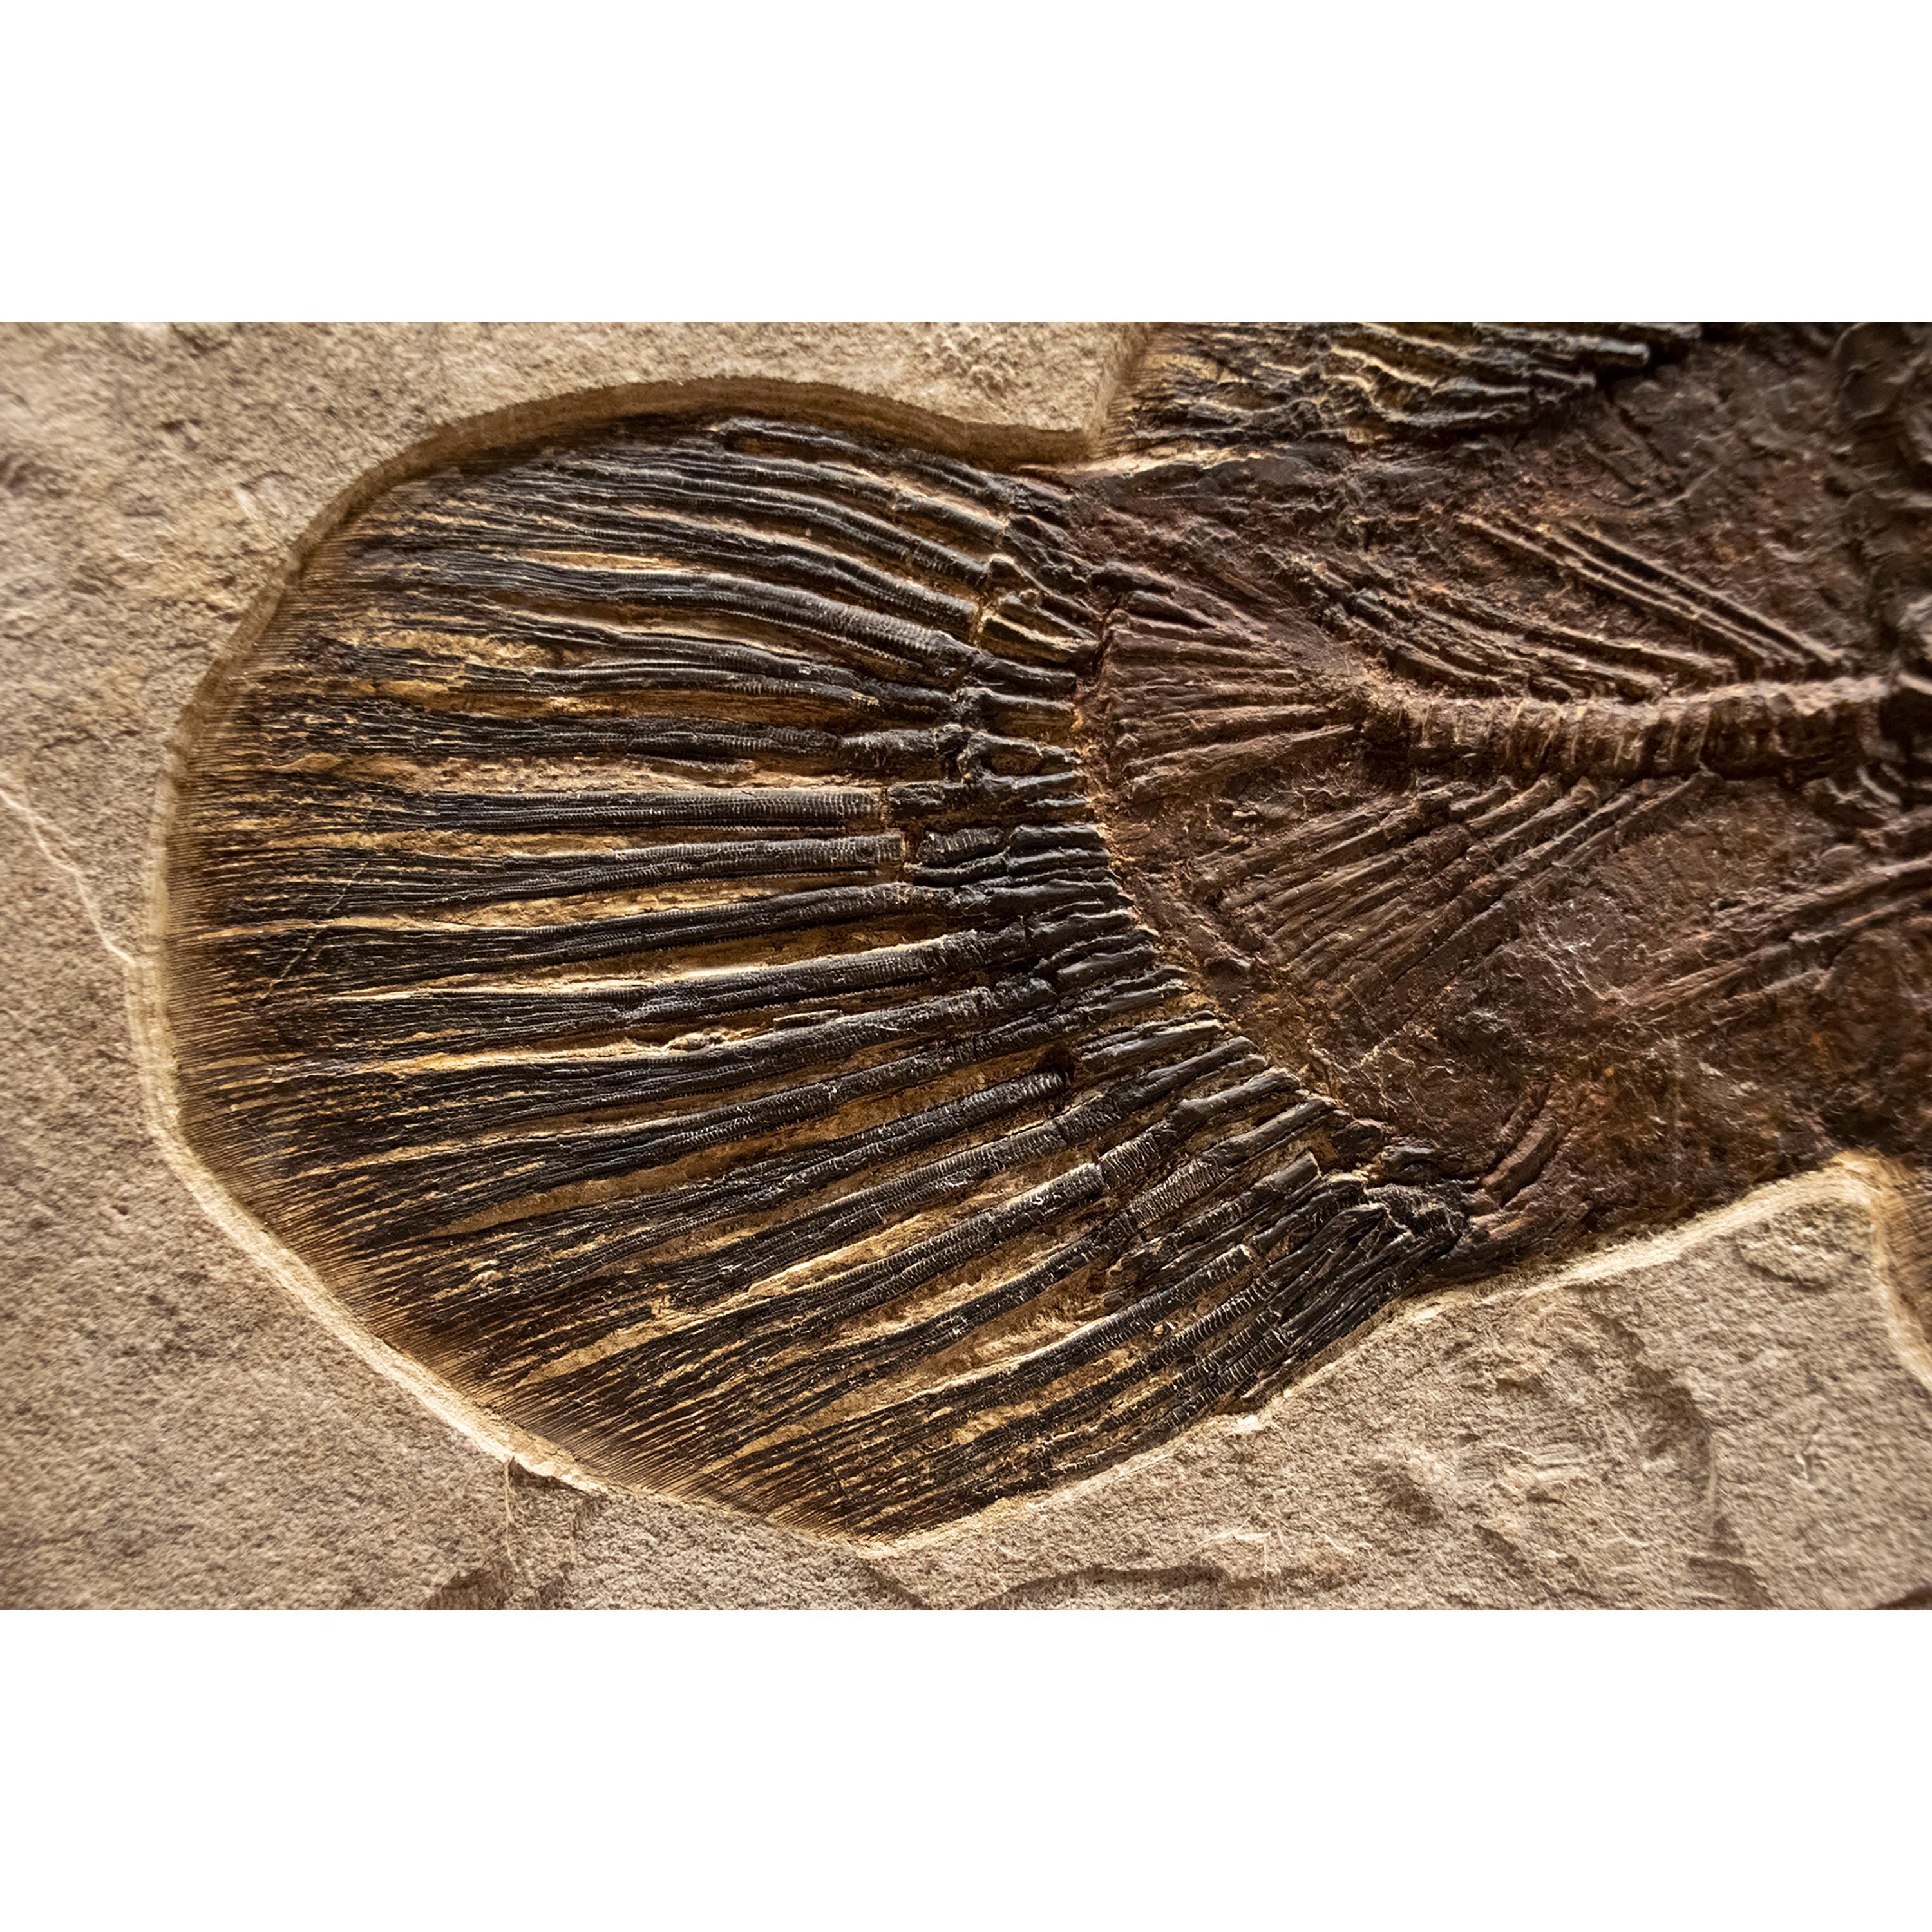 Contemporary 50 Million Year Old Fossil Fish Amia, Bowfin, Mural in Stone, from Wyoming